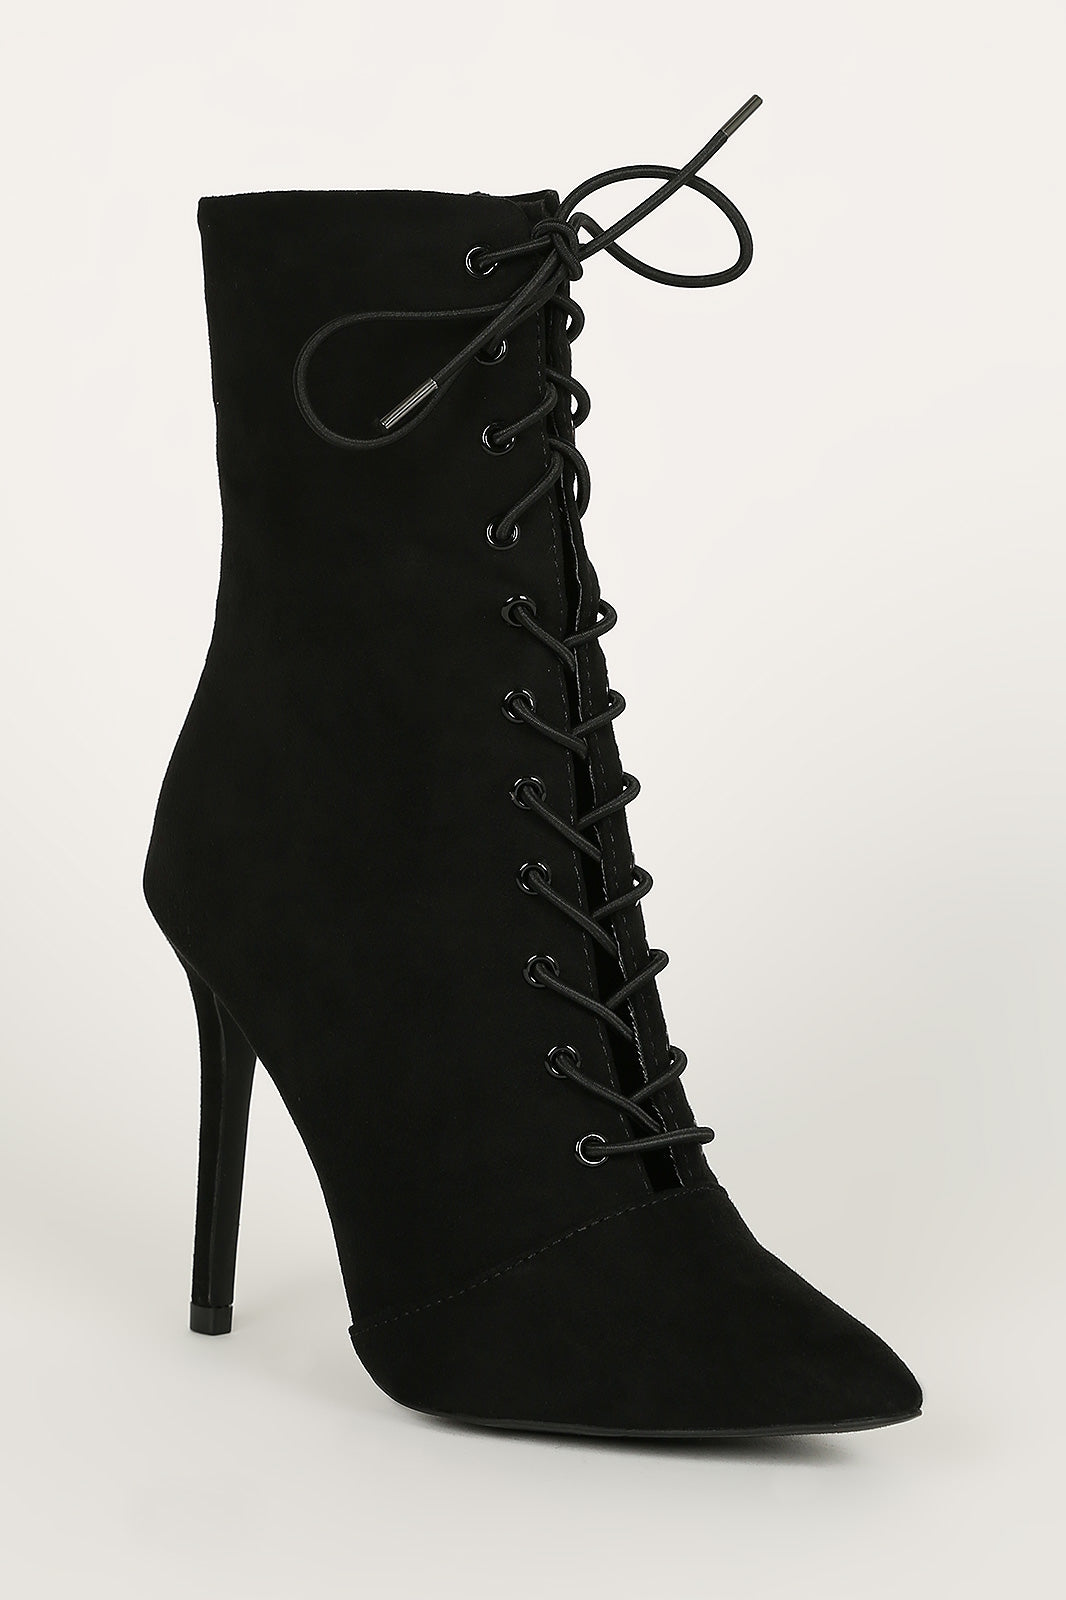 The London - Black Stilleto Lace Up Booties 